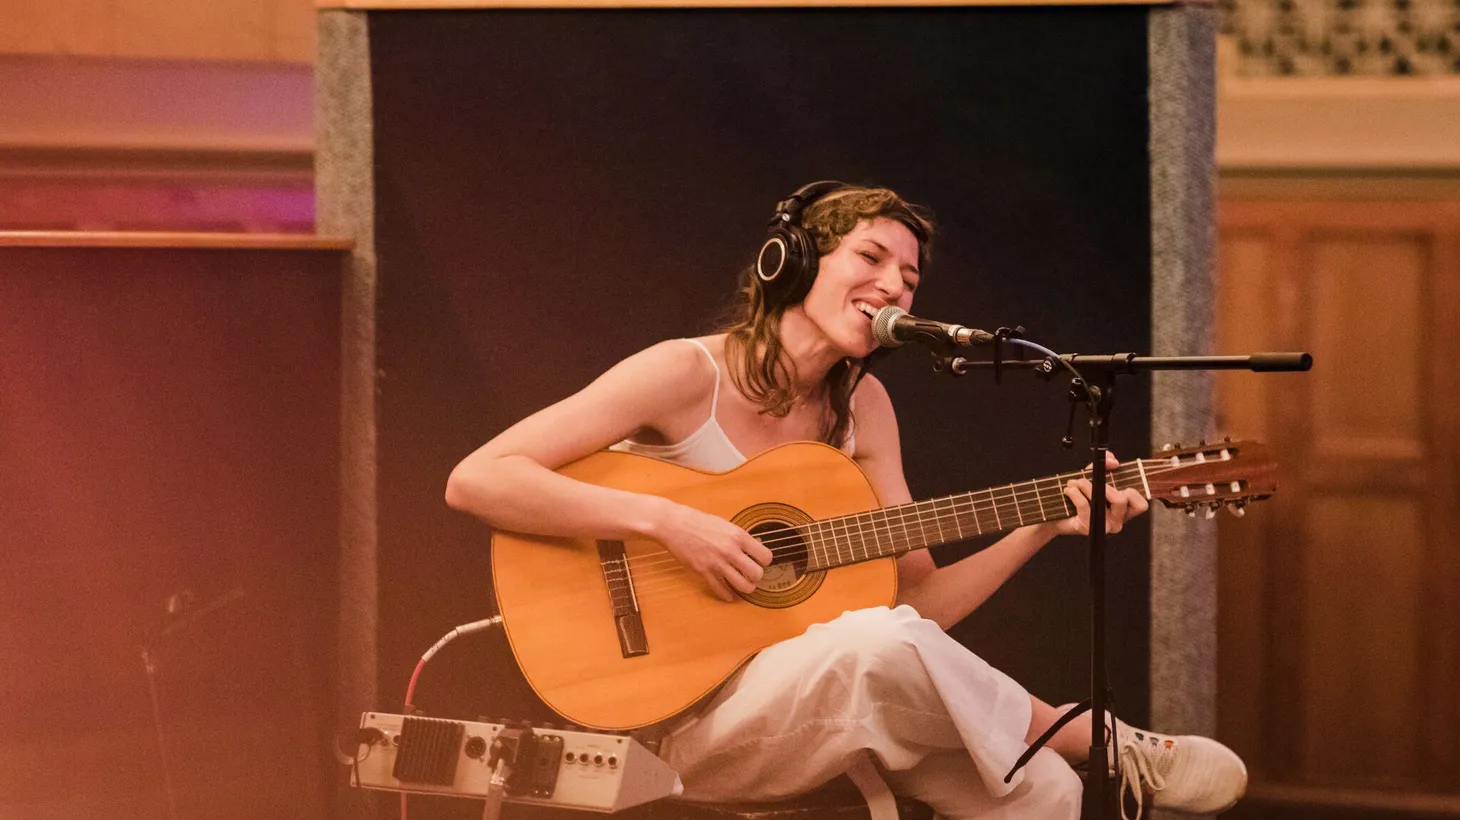 Hannah Harding, the voice and songwriter behind Aldous Harding, doesn't take herself too seriously. Her latest album Designer showcases her talent for songwriting and her ability to deliver unique insight to the world around her.